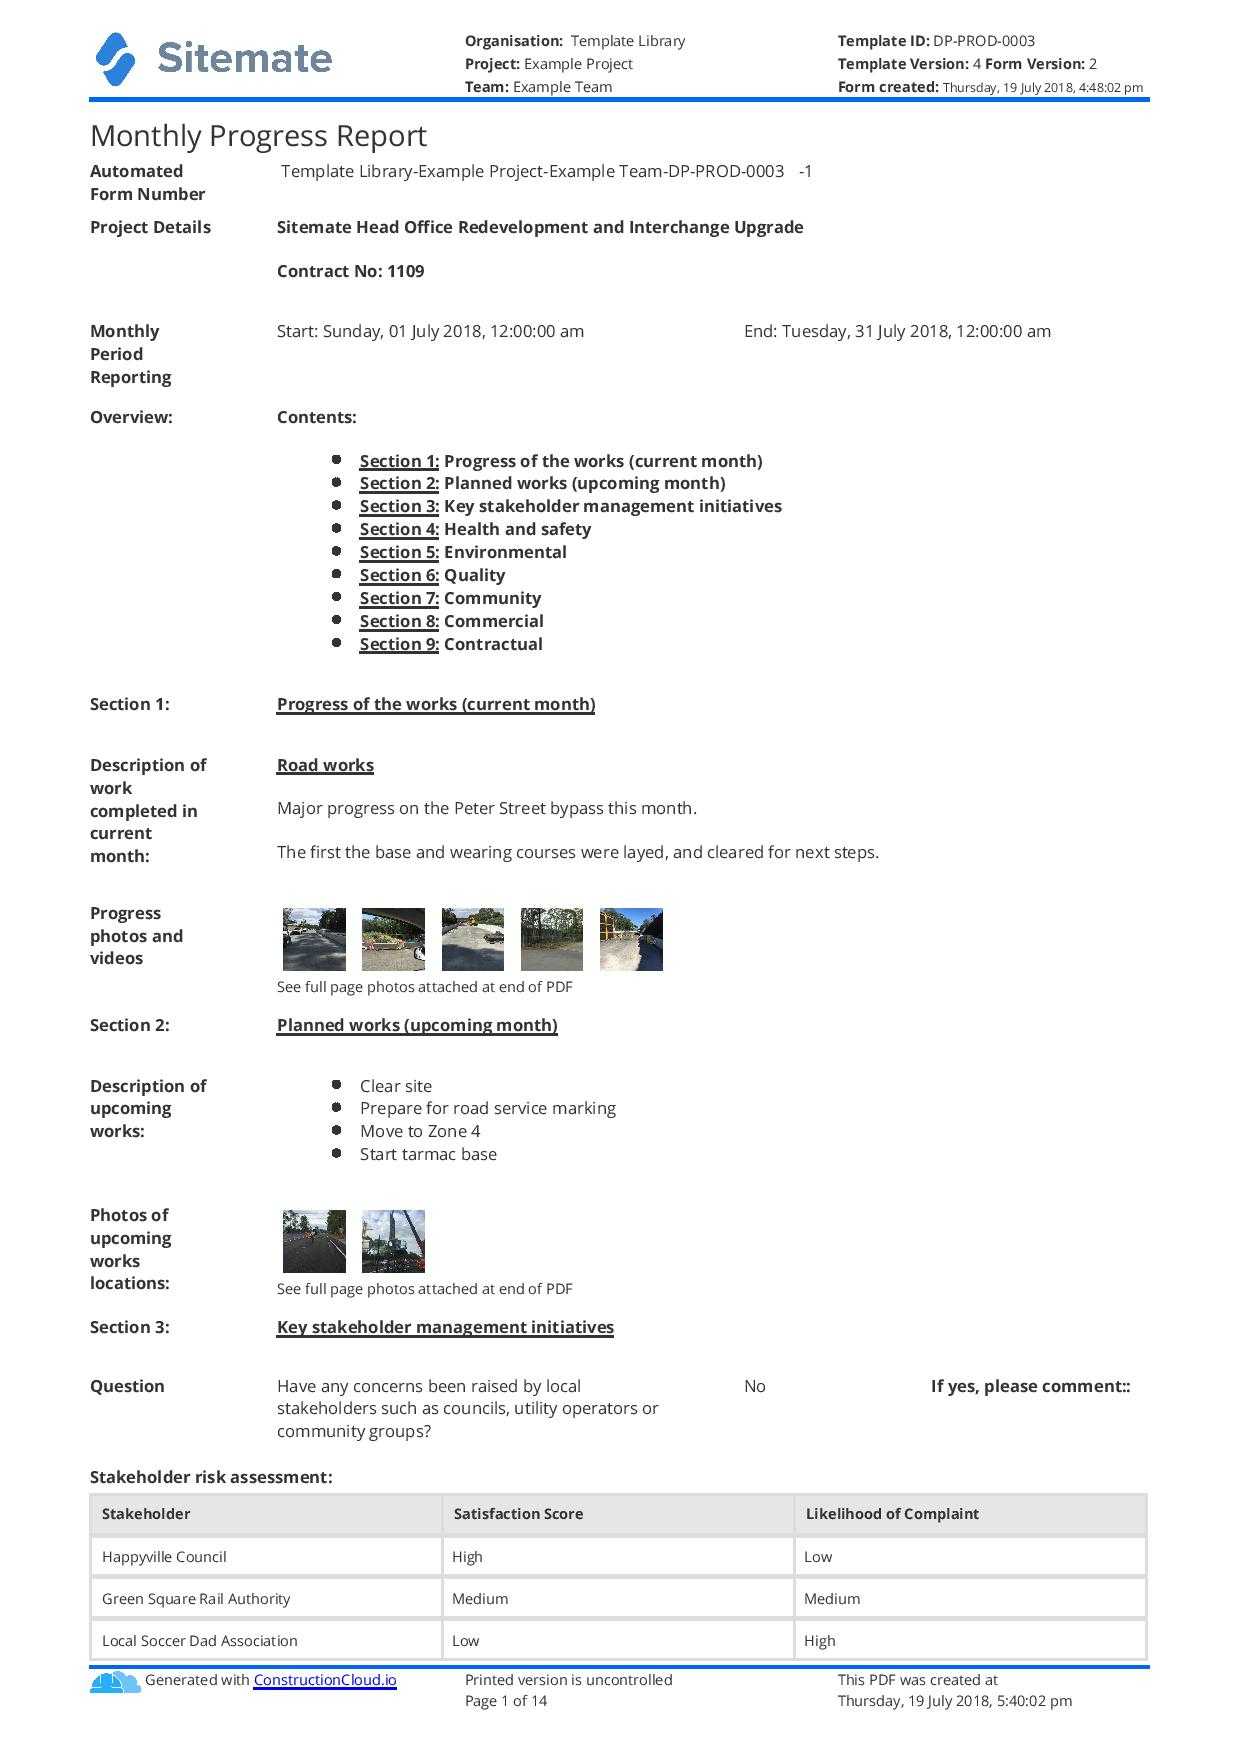 Monthly Construction Progress Report Template: Use This Inside Construction Daily Progress Report Template